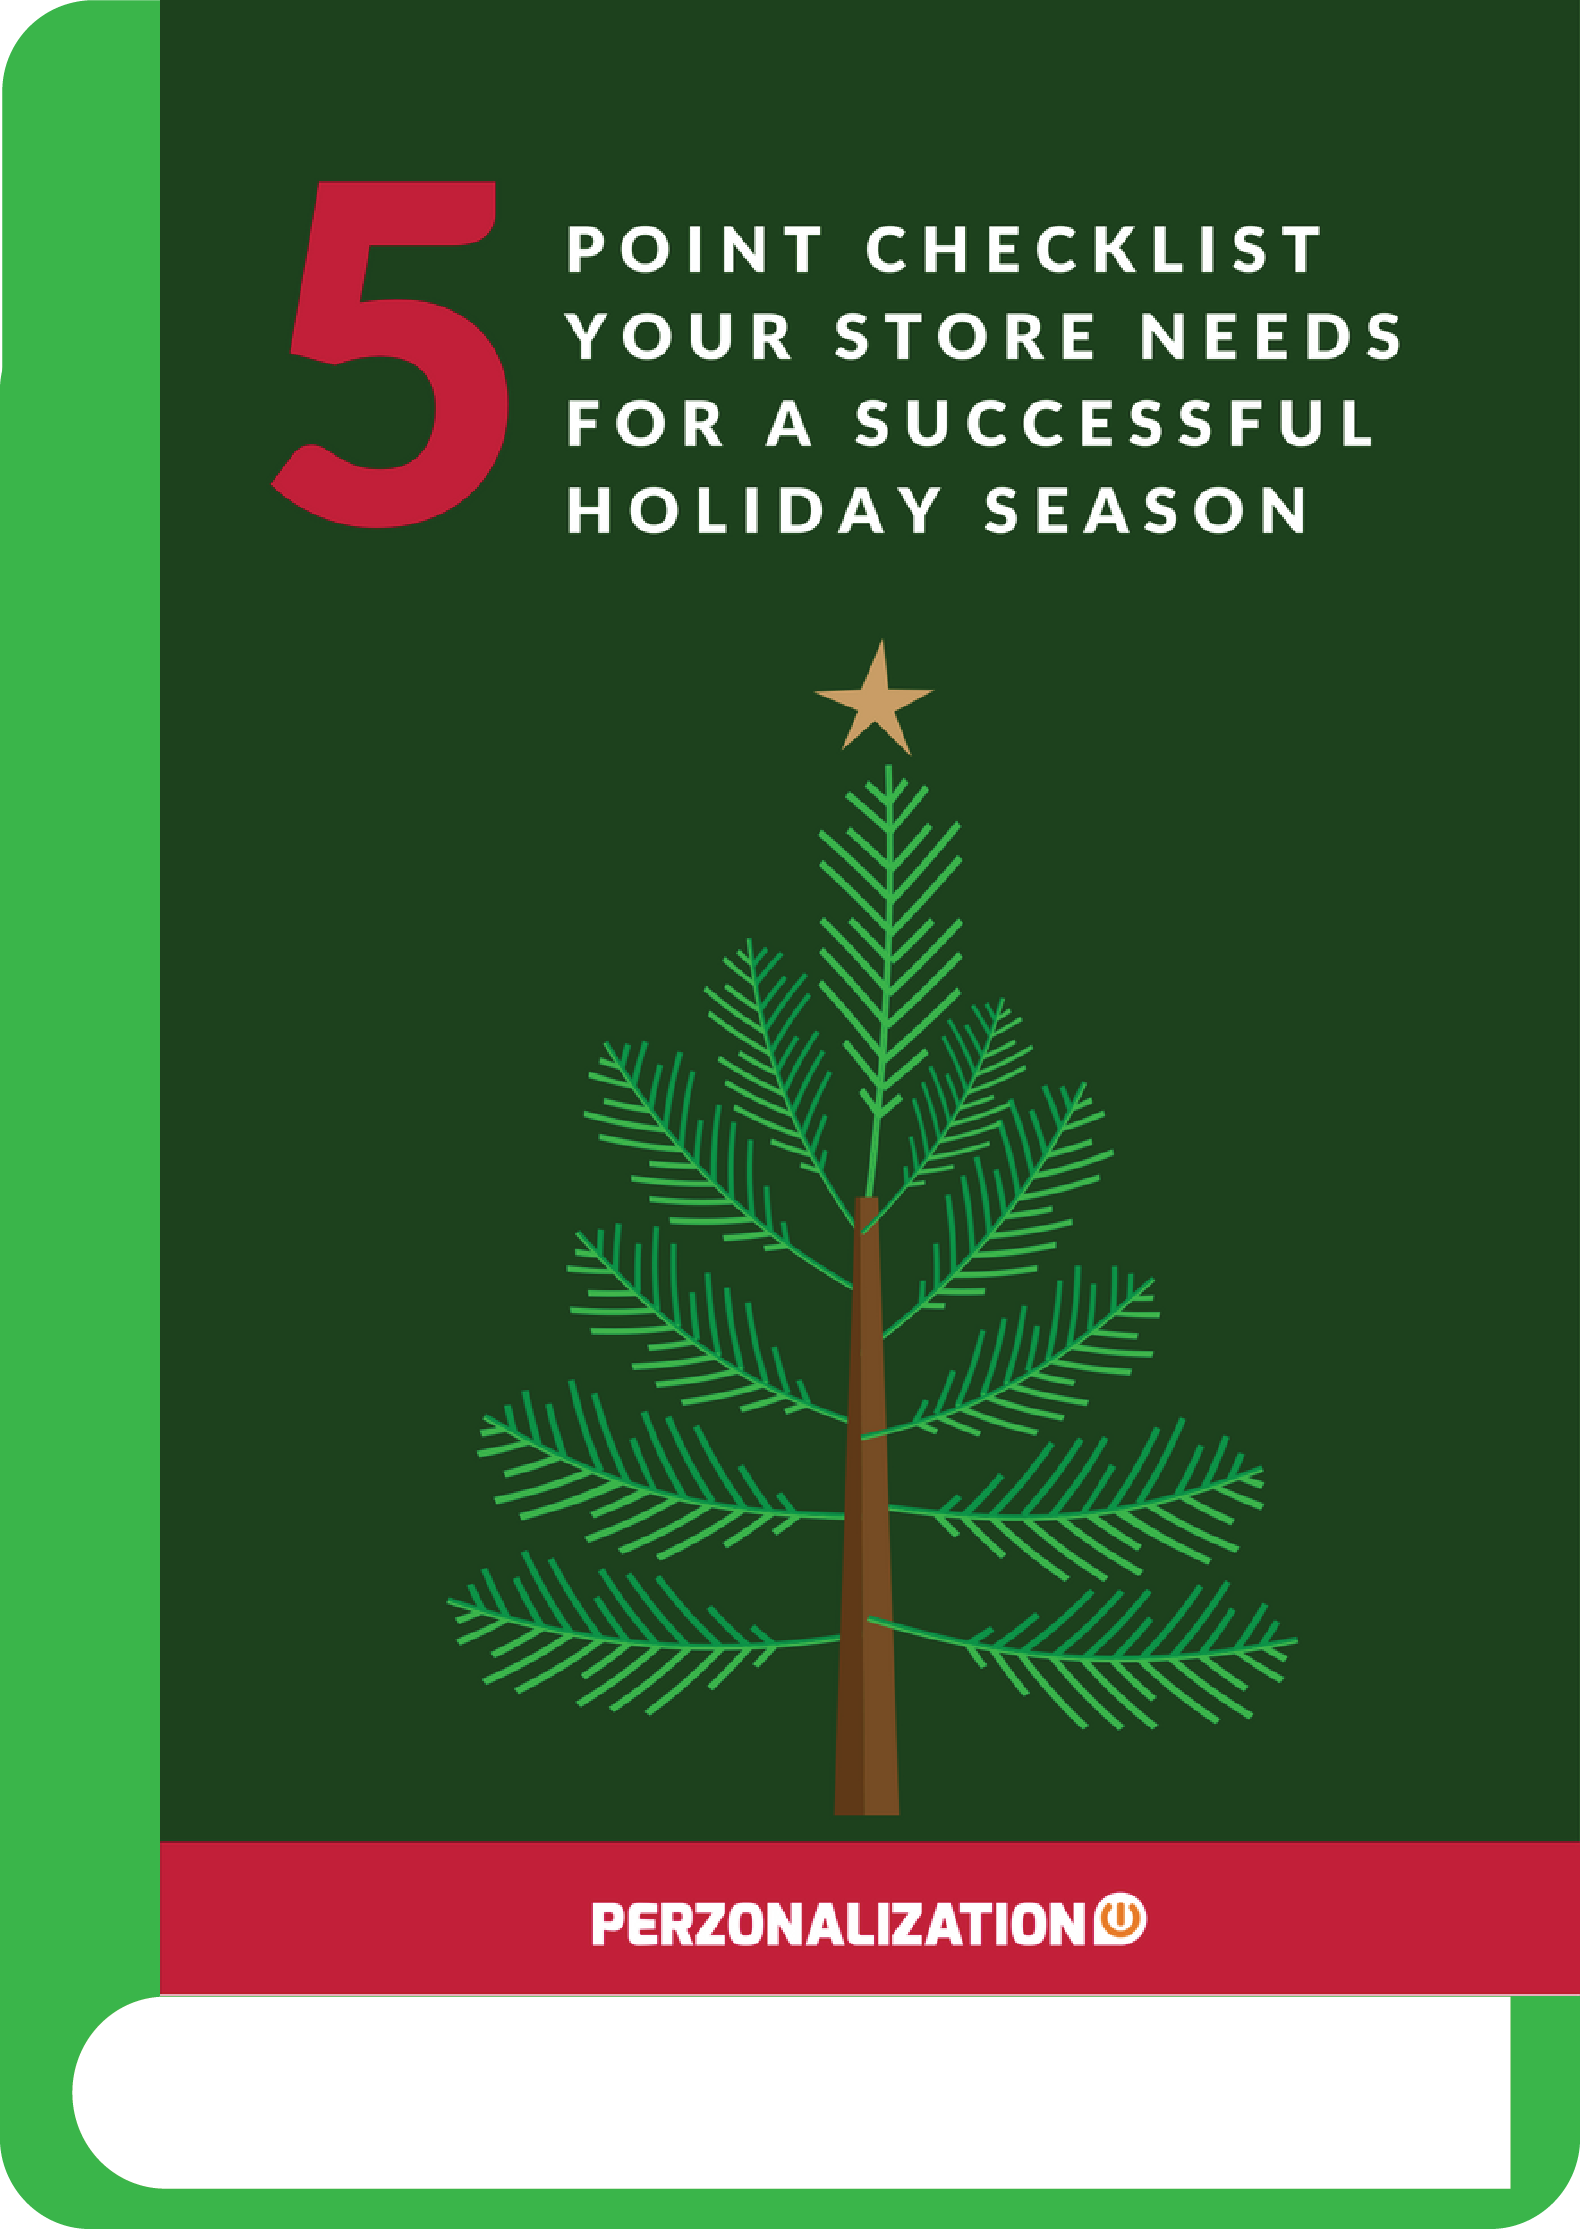 If you’re thinking about developing a complete eCommerce marketing plan for your store this Holiday Season, use these tips we mentioned in this eBook!